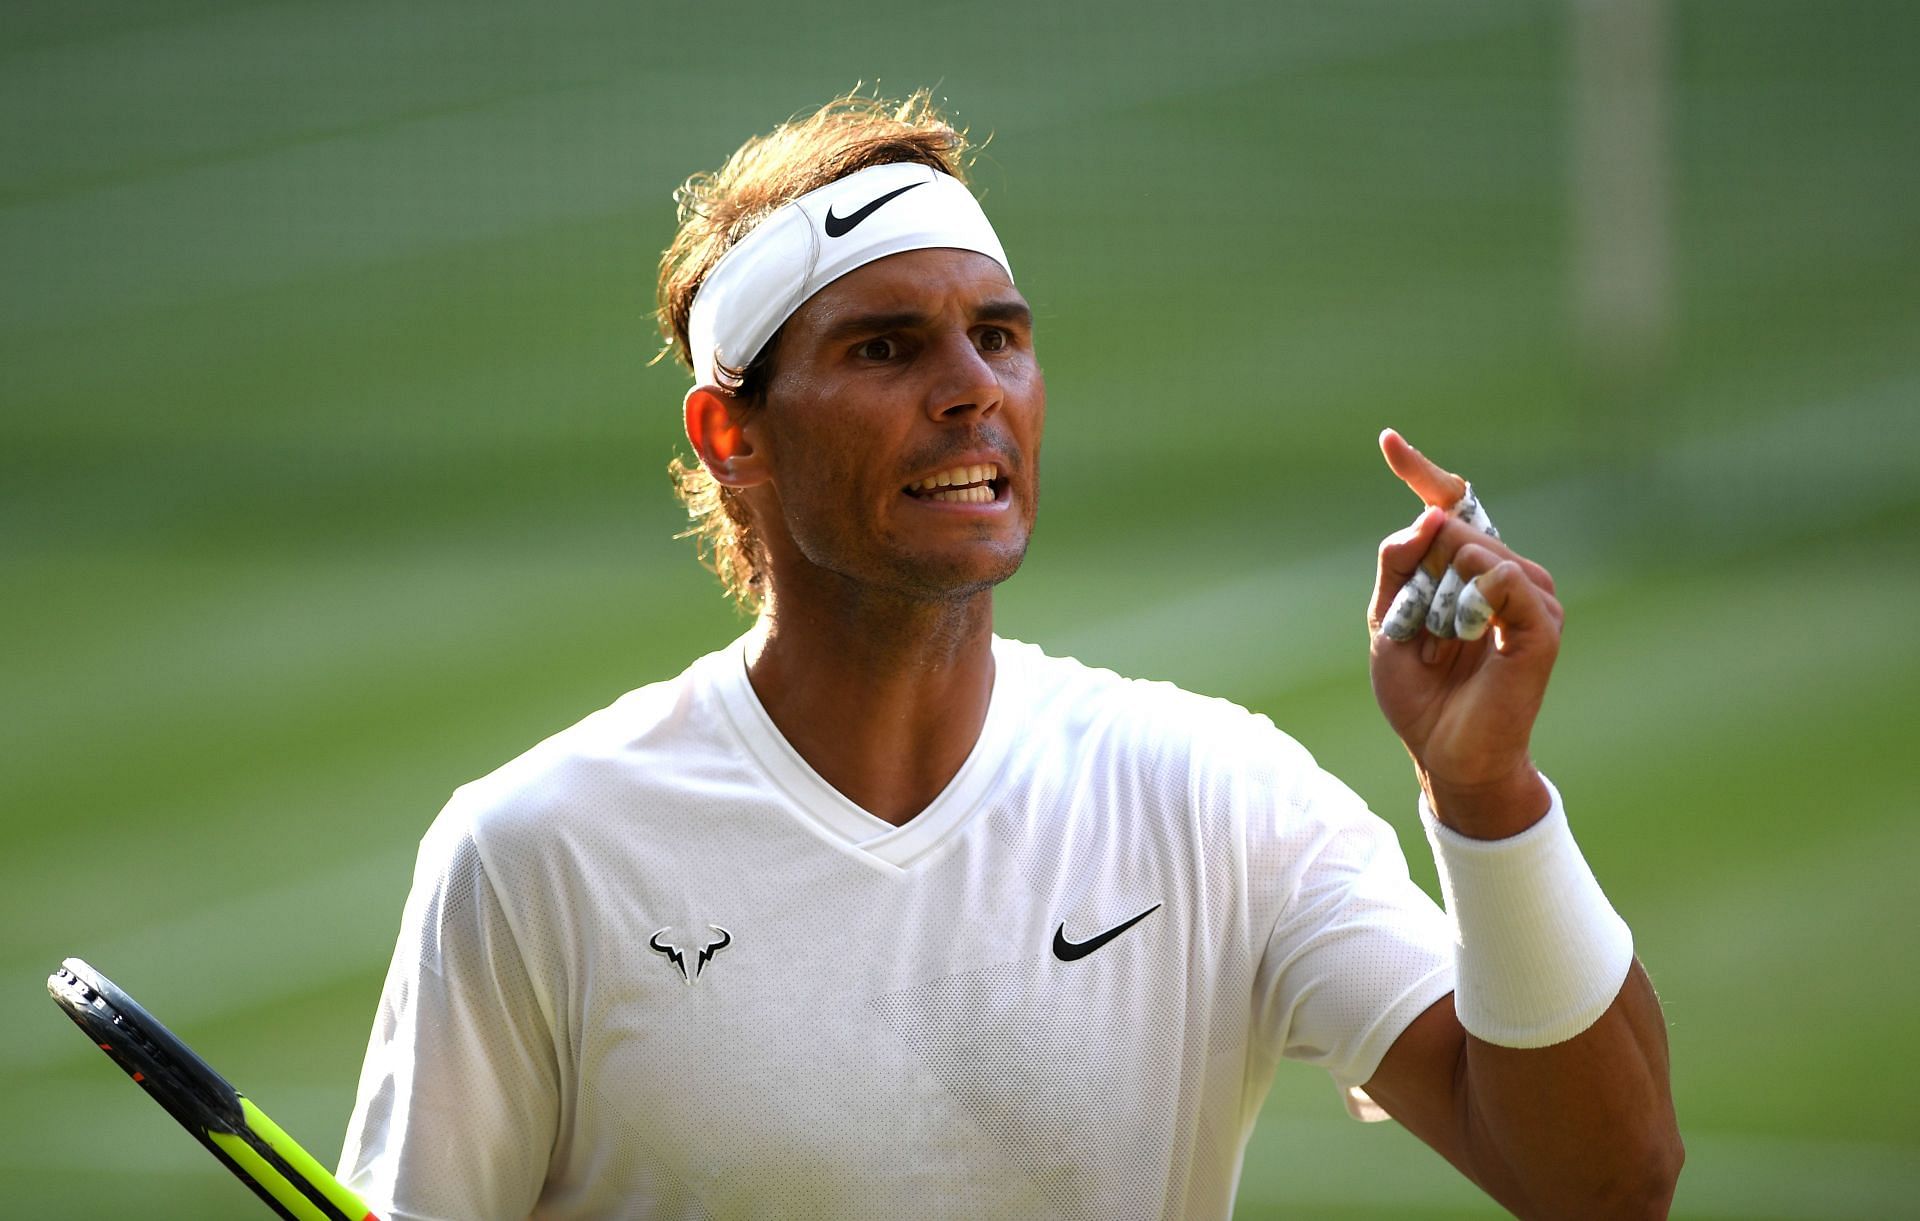 Rafael Nadal is also on the entry list for the 2022 Wimbledon Championships.